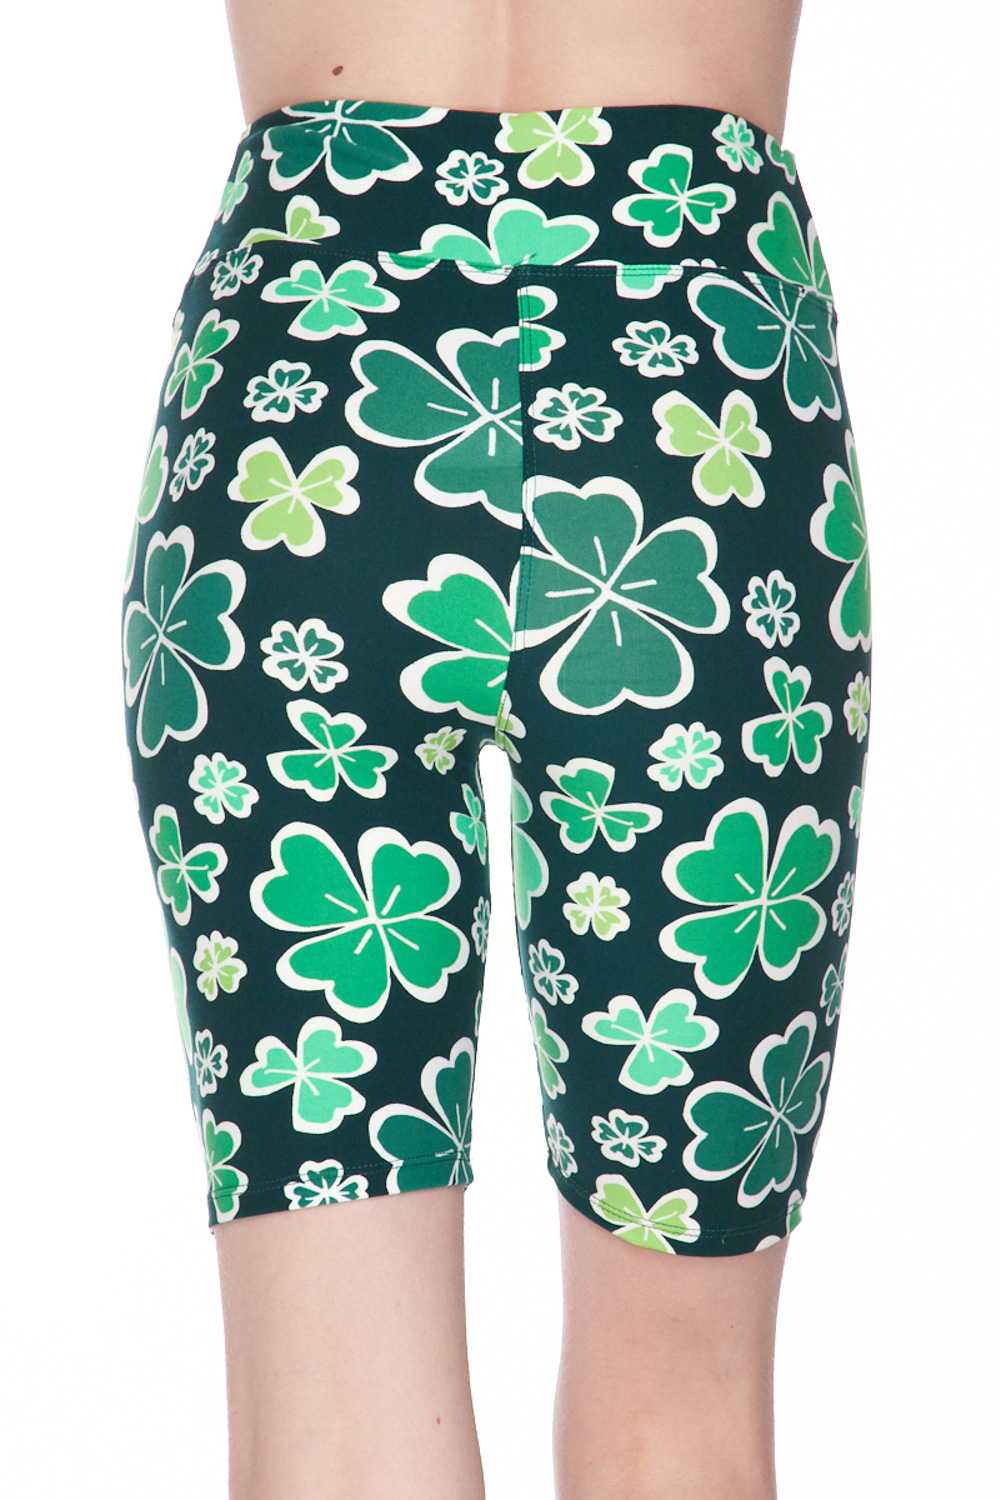 Wholesale Buttery Smooth Green Irish Clover Plus Size Shorts - 3 Inch